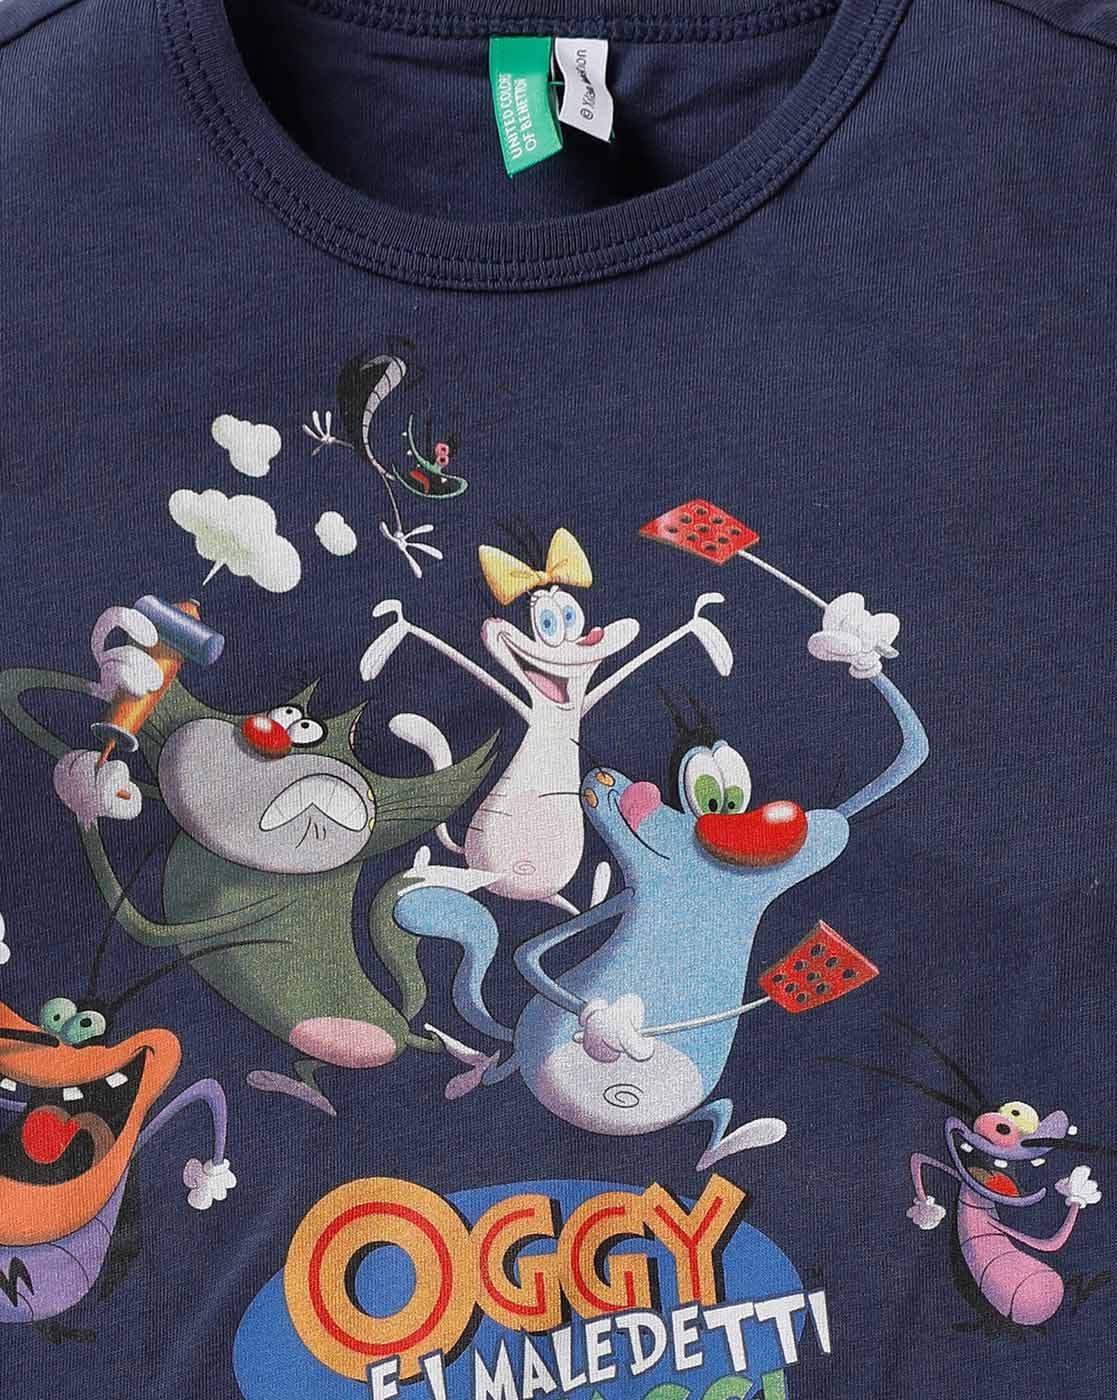 oggy and the cockroaches t shirt india